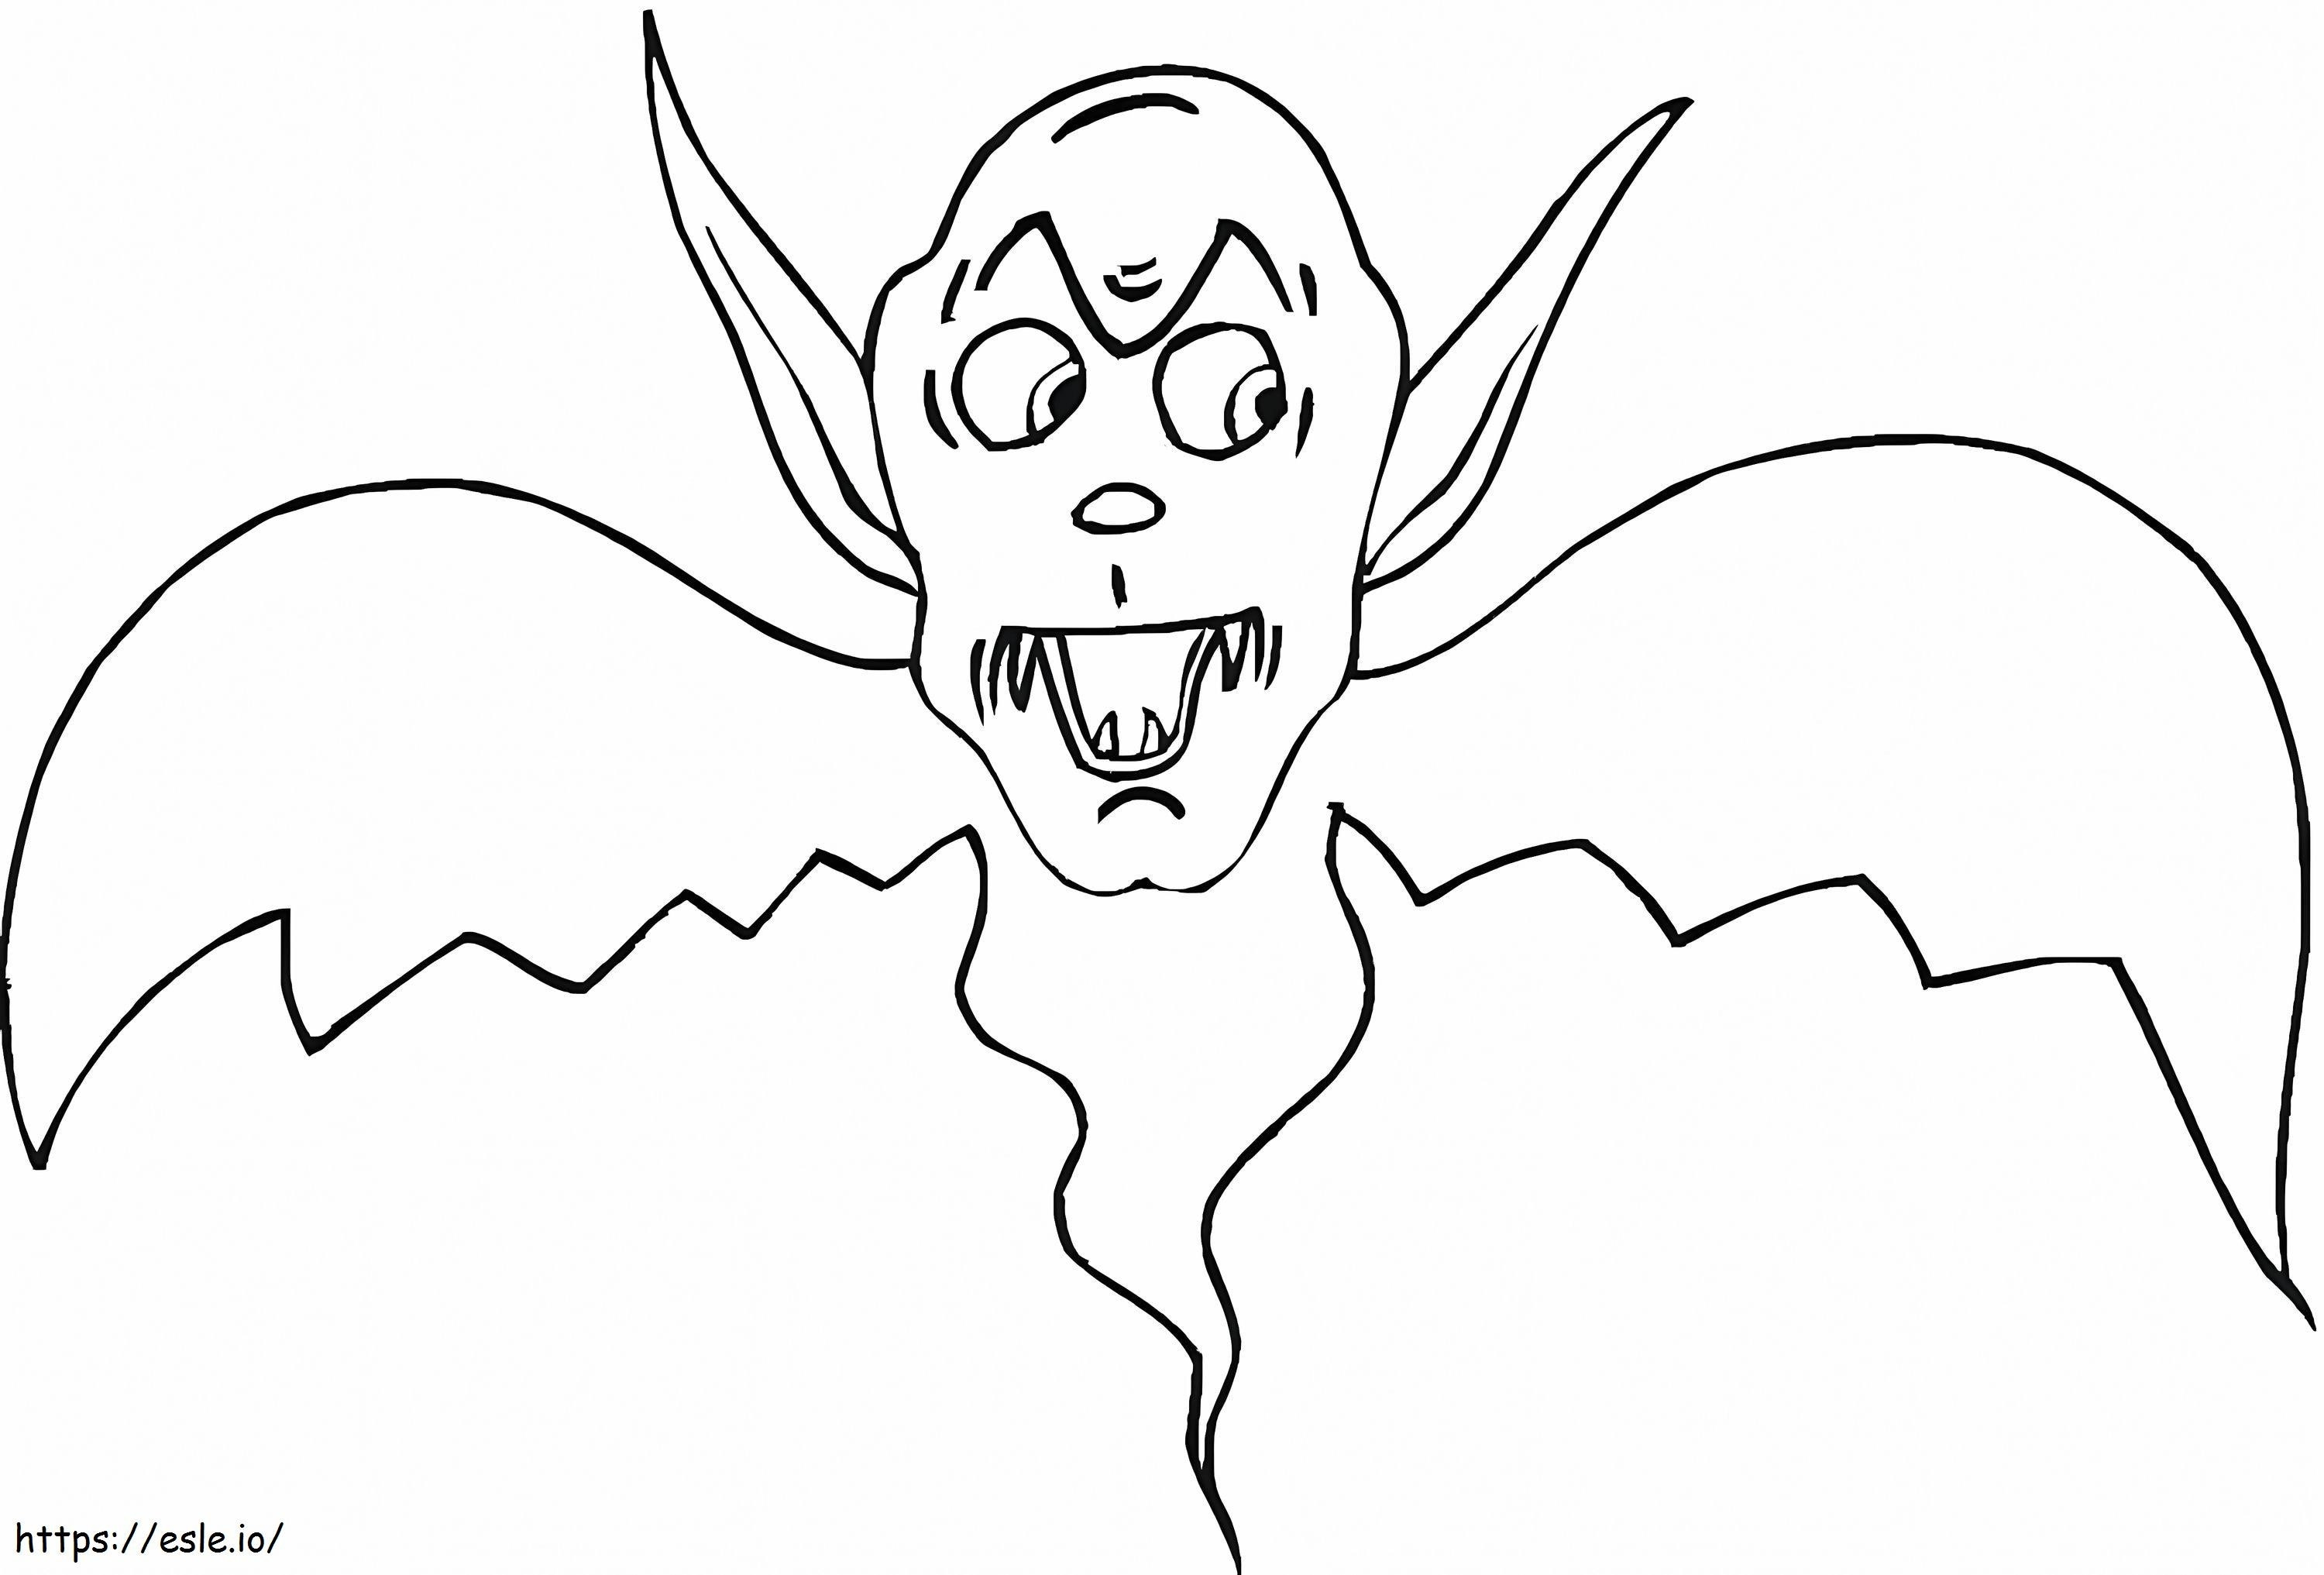 Vampire Ghost coloring page